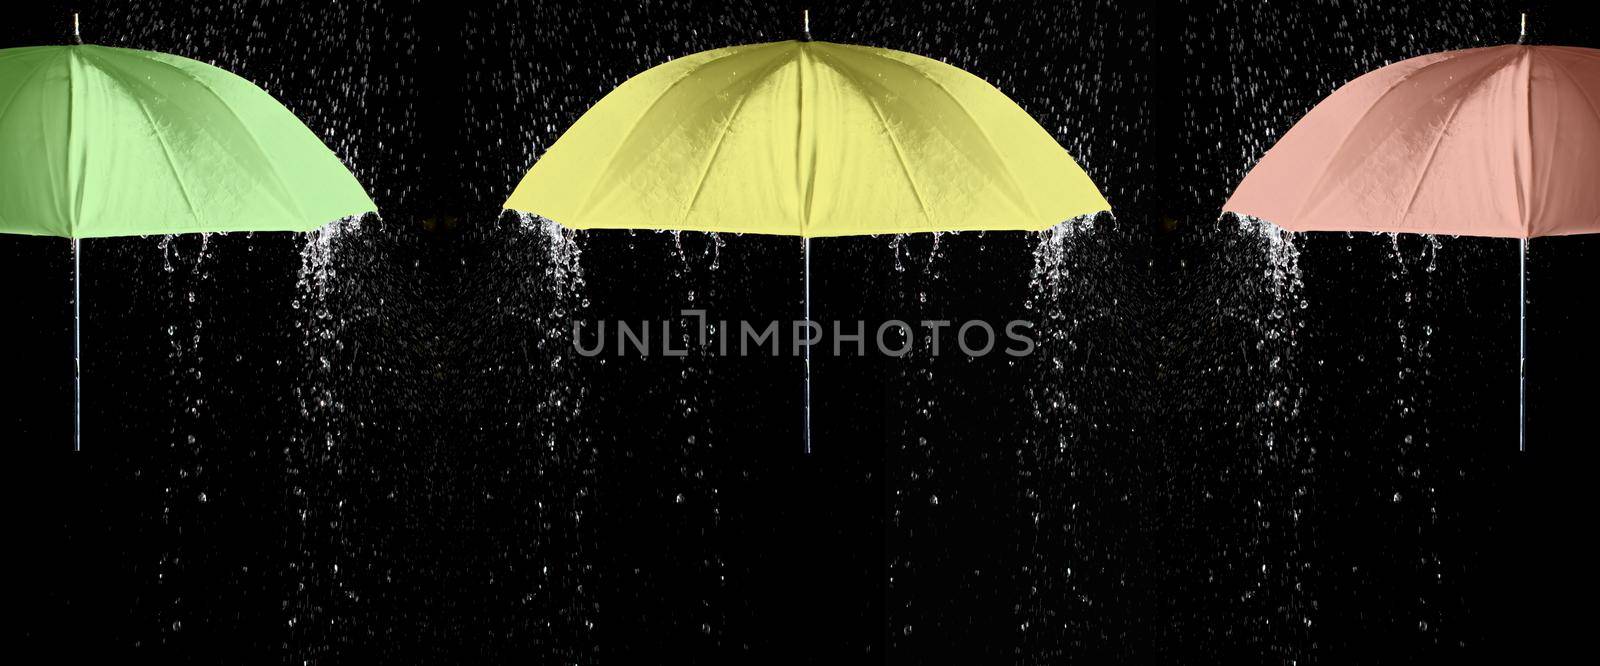 Three color umbrellas under raindrops with black background by mvg6894